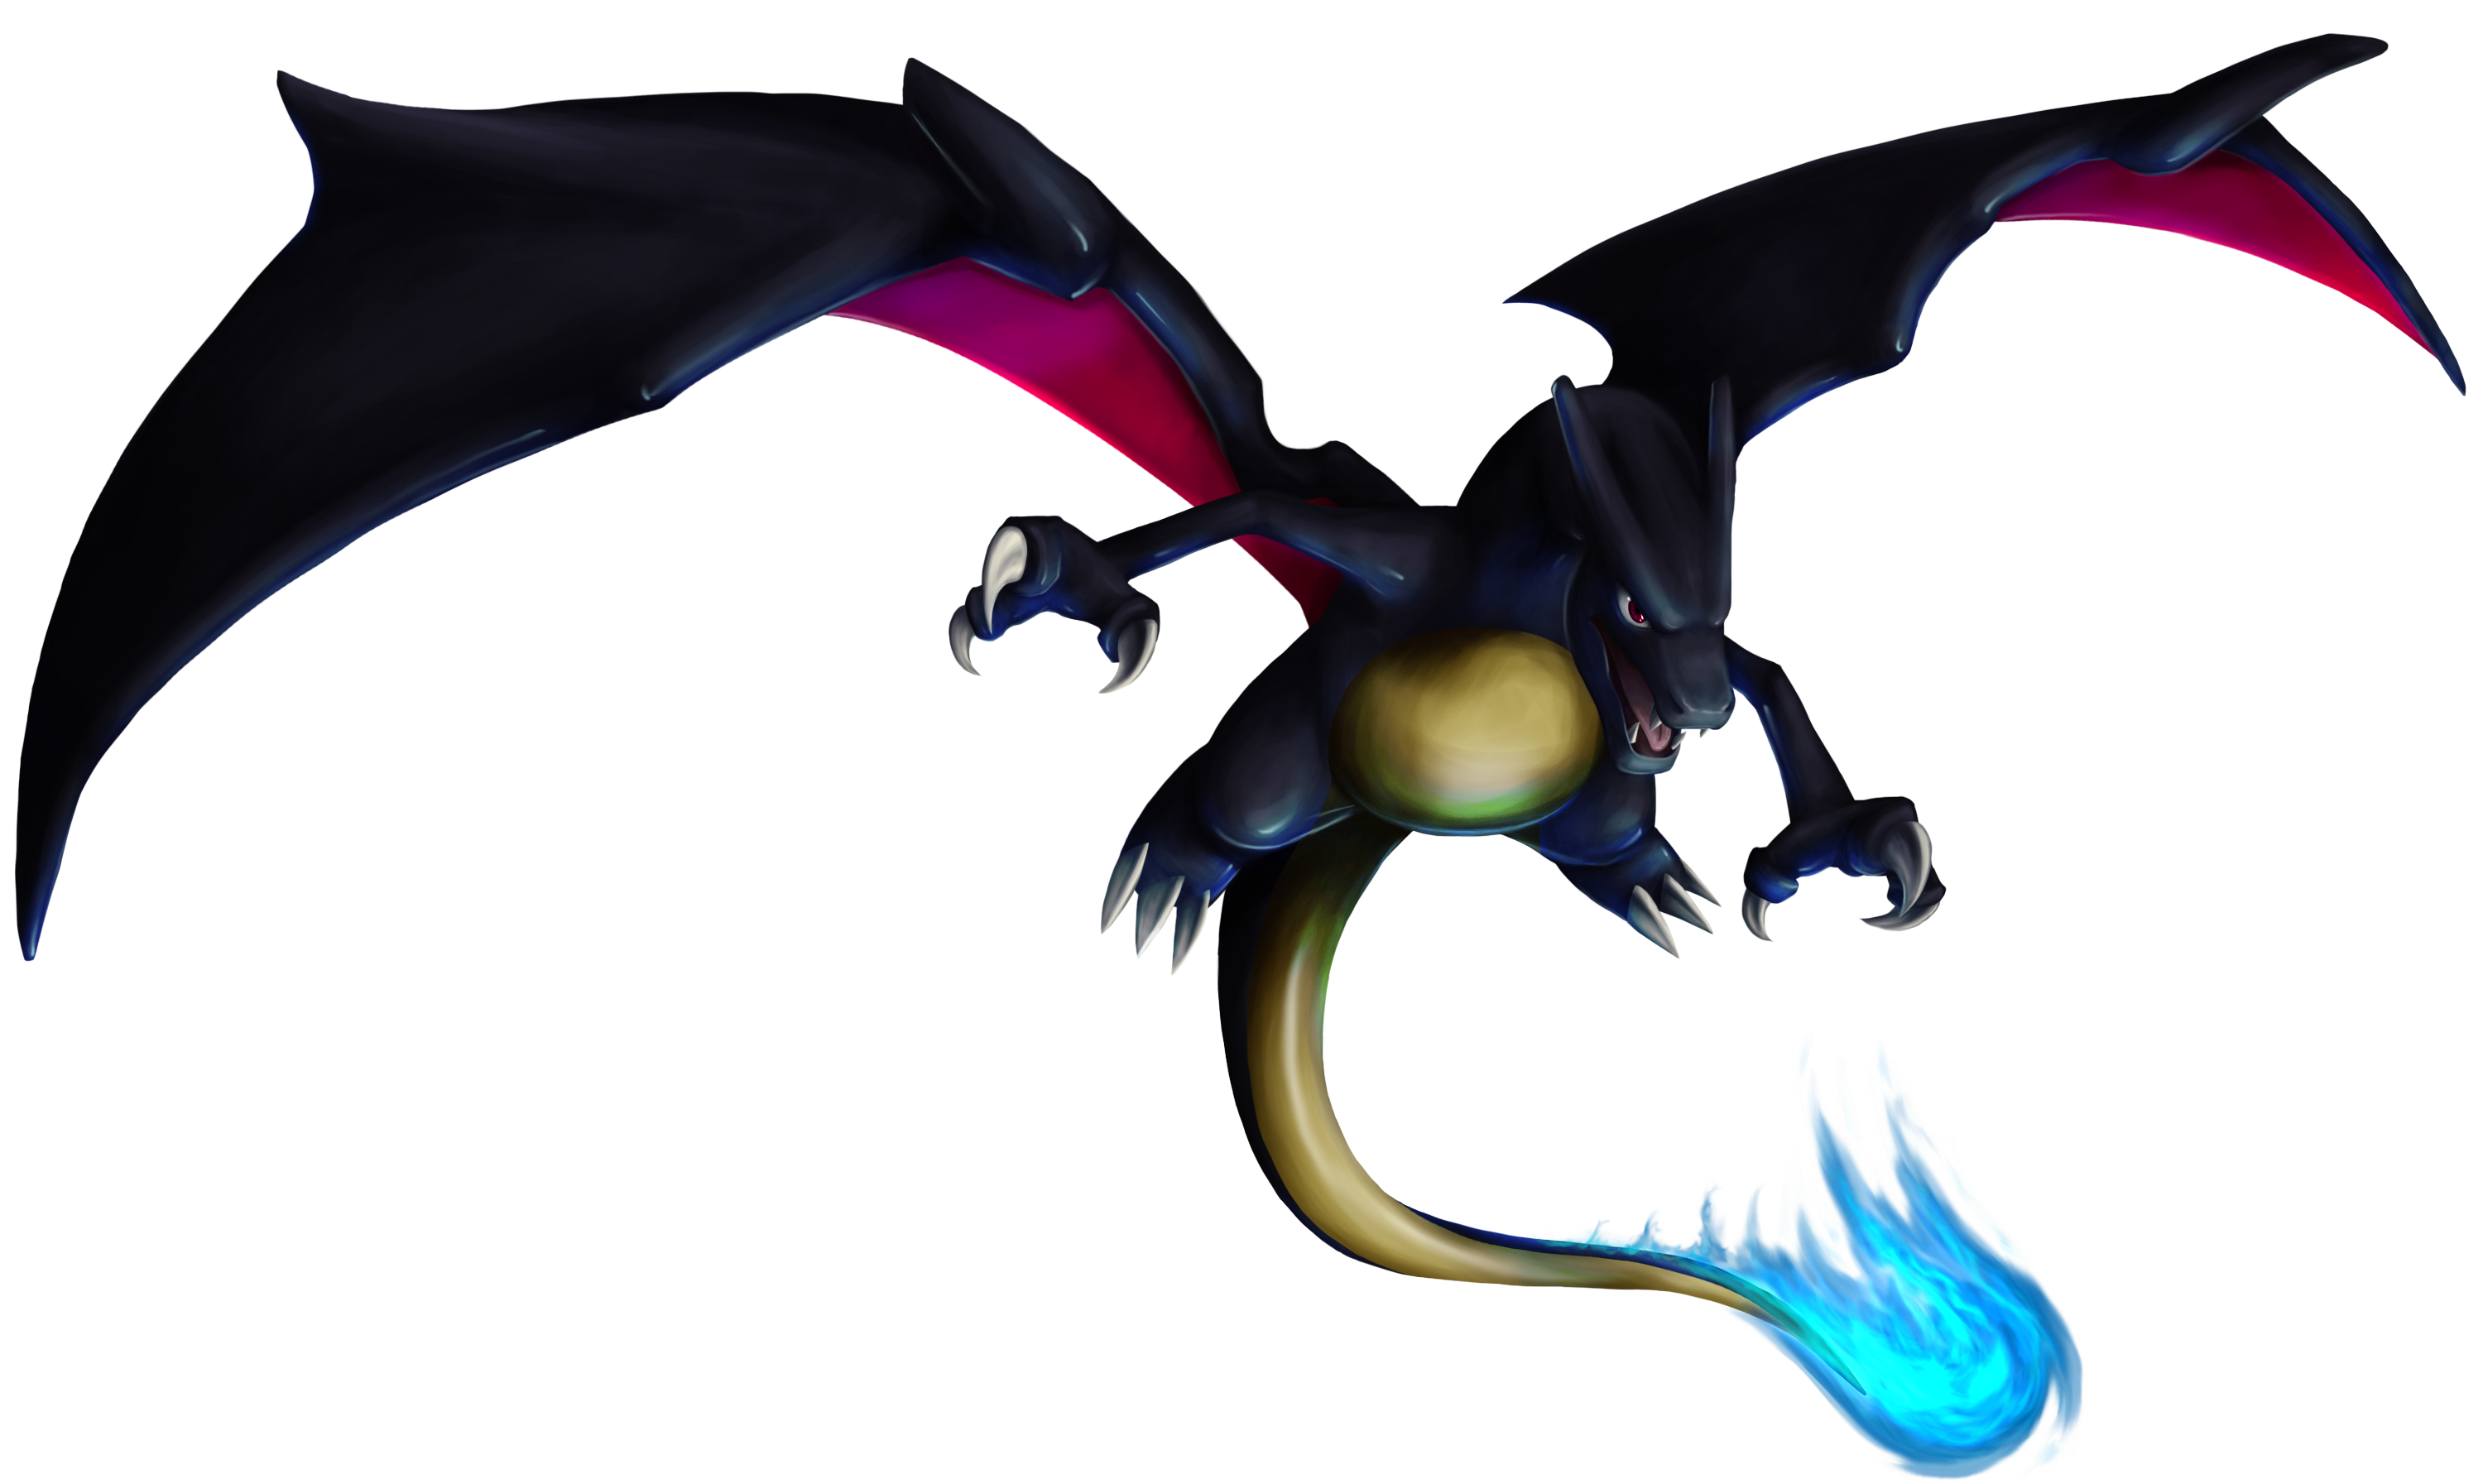 Blue Shiny charizard because it's cool. 